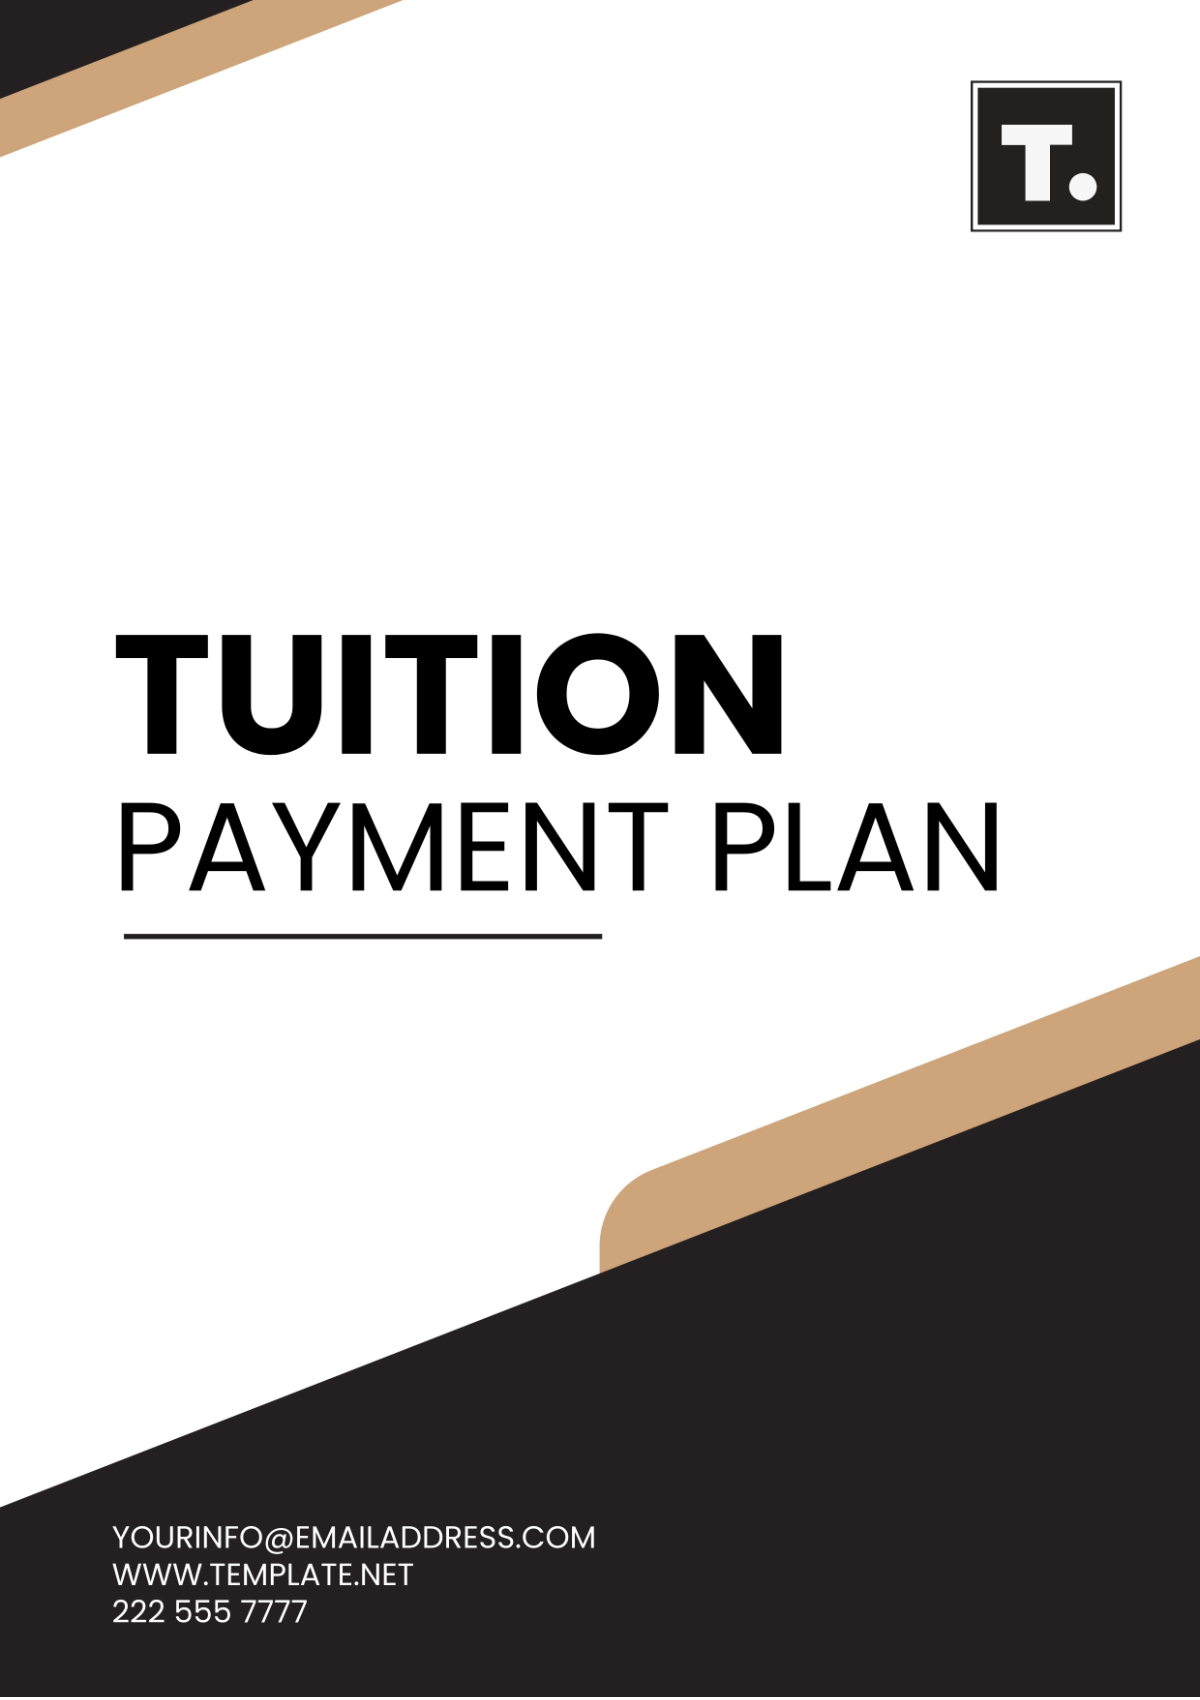 Free Tuition Payment Plan Template